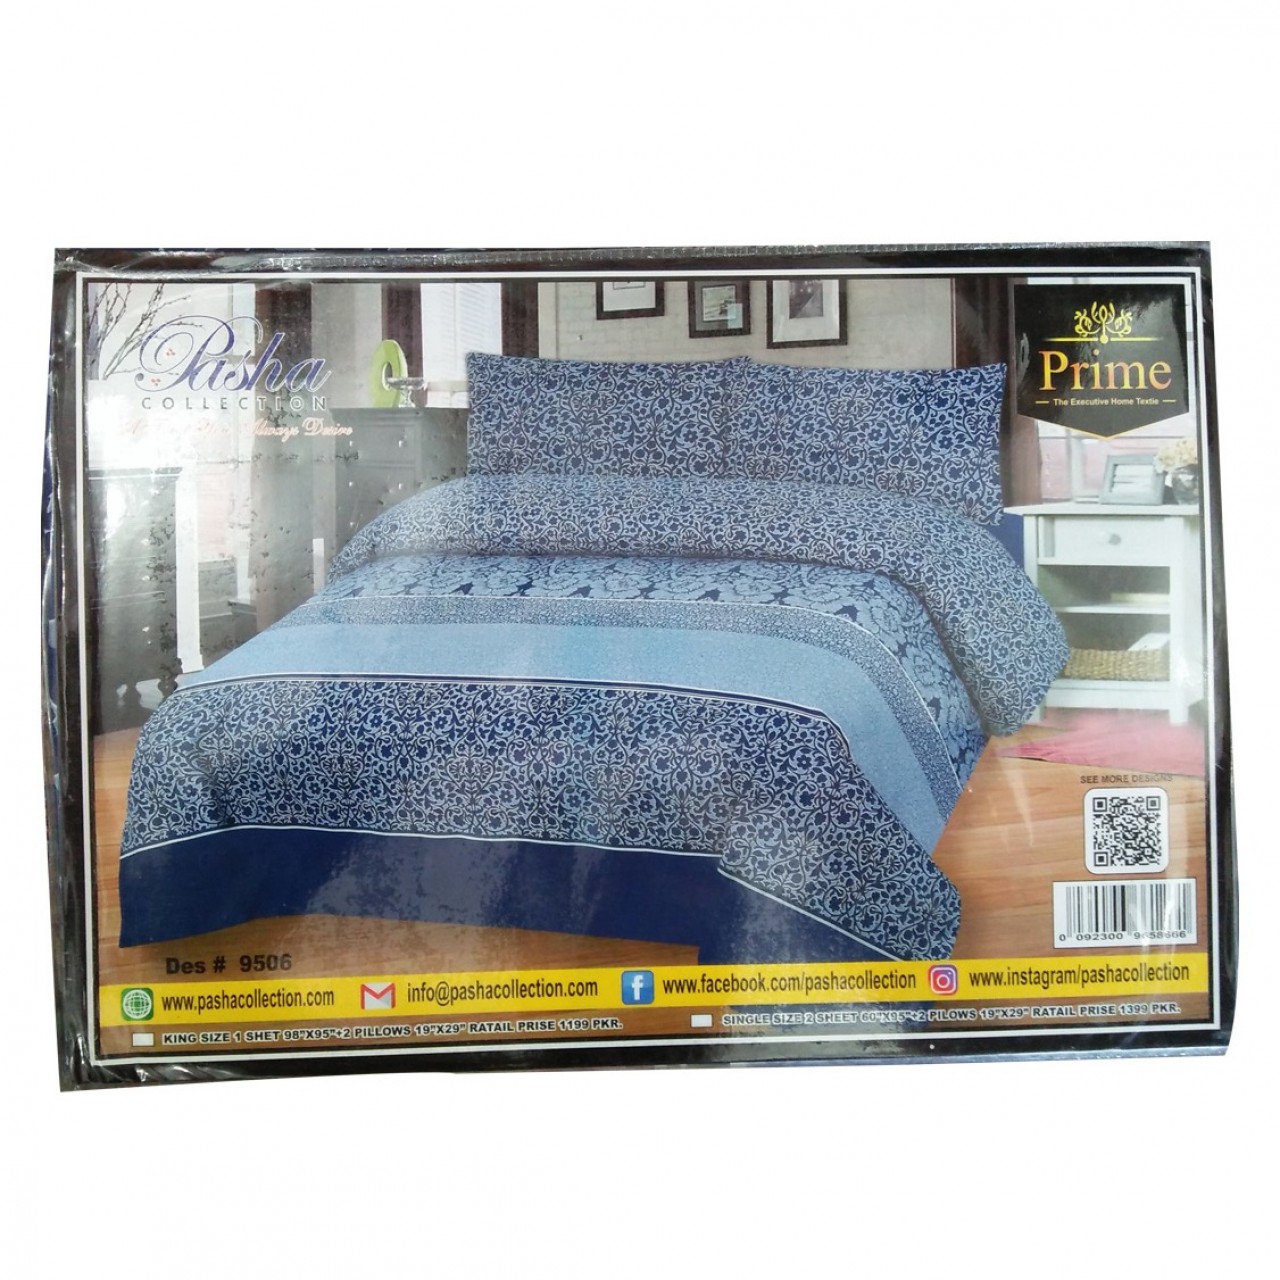 Pasha Collection King Size Double Bed Sheet Des-9506 With 2 Pillow Covers